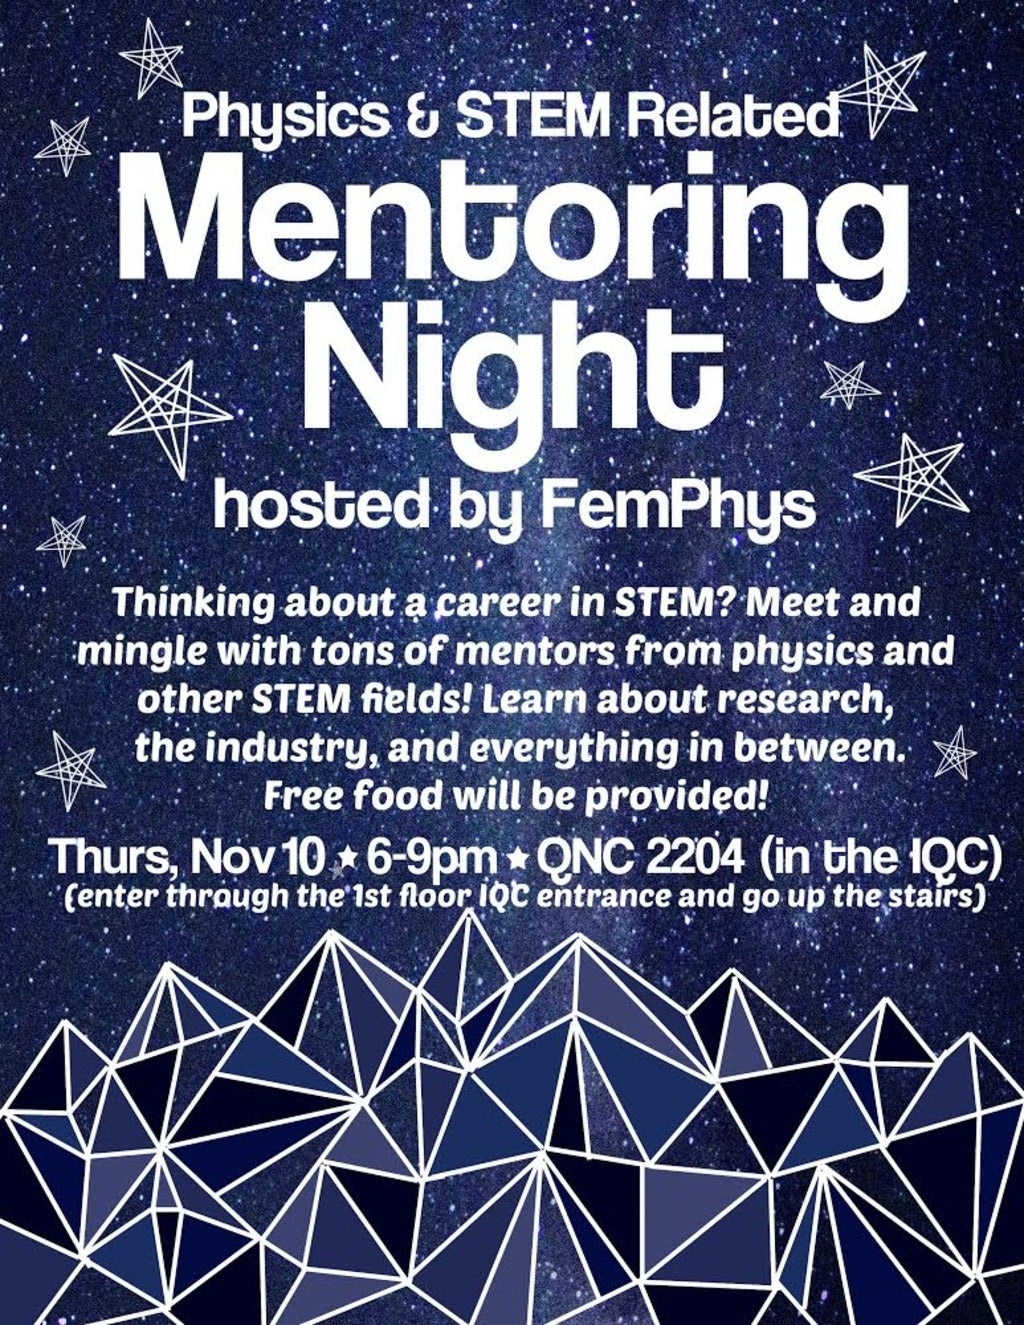 Mentoring Night event information in white letters on a blue starry background.